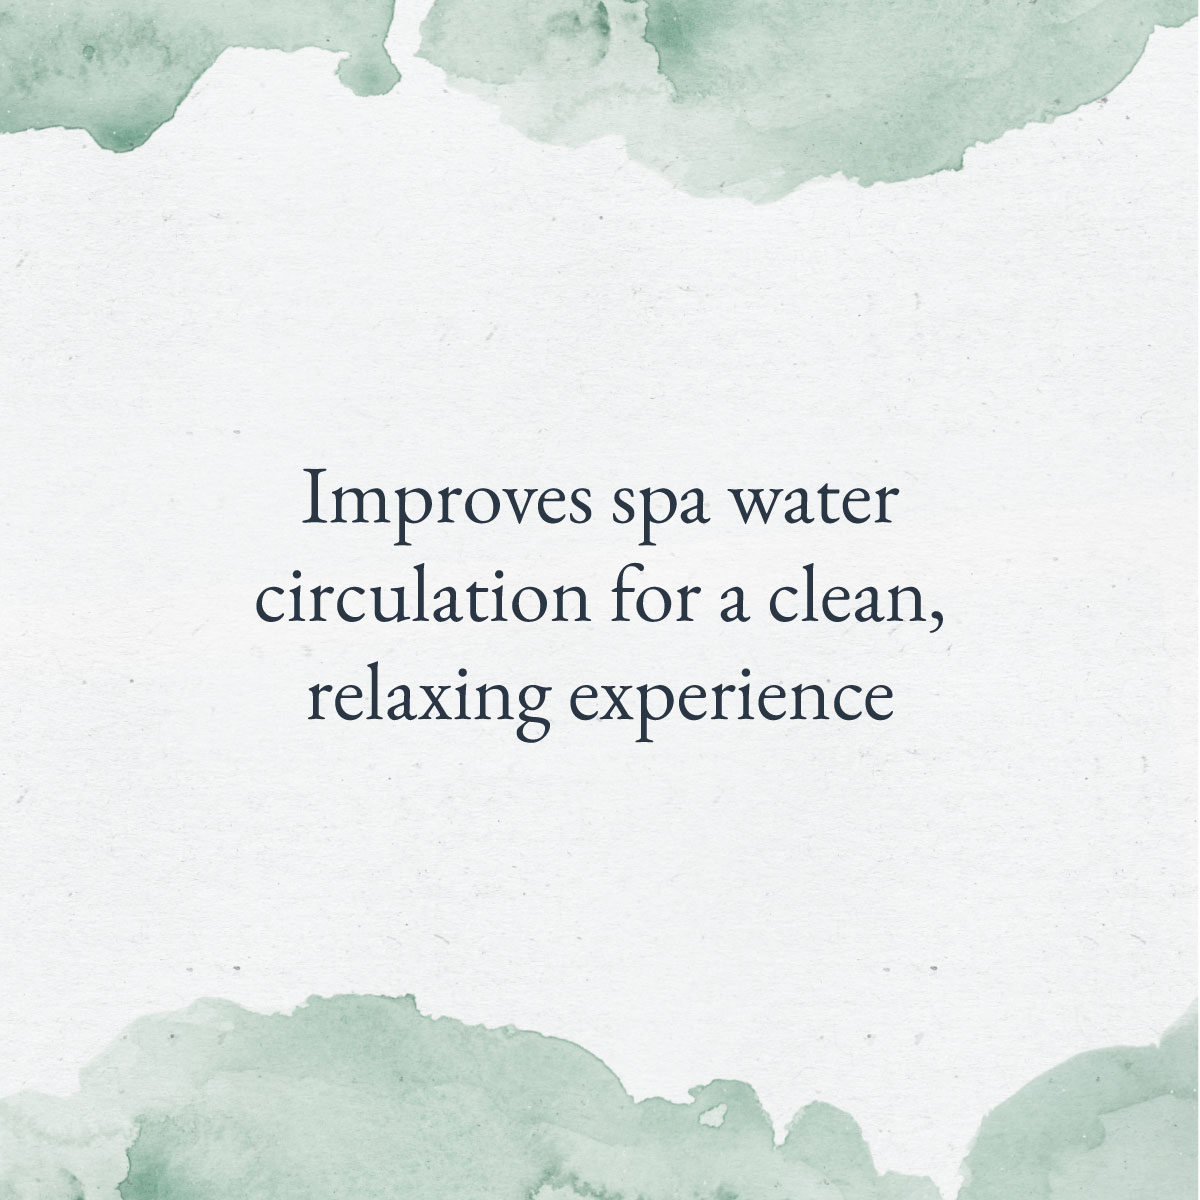 Improves spa water circulation for a clean, relaxing experience